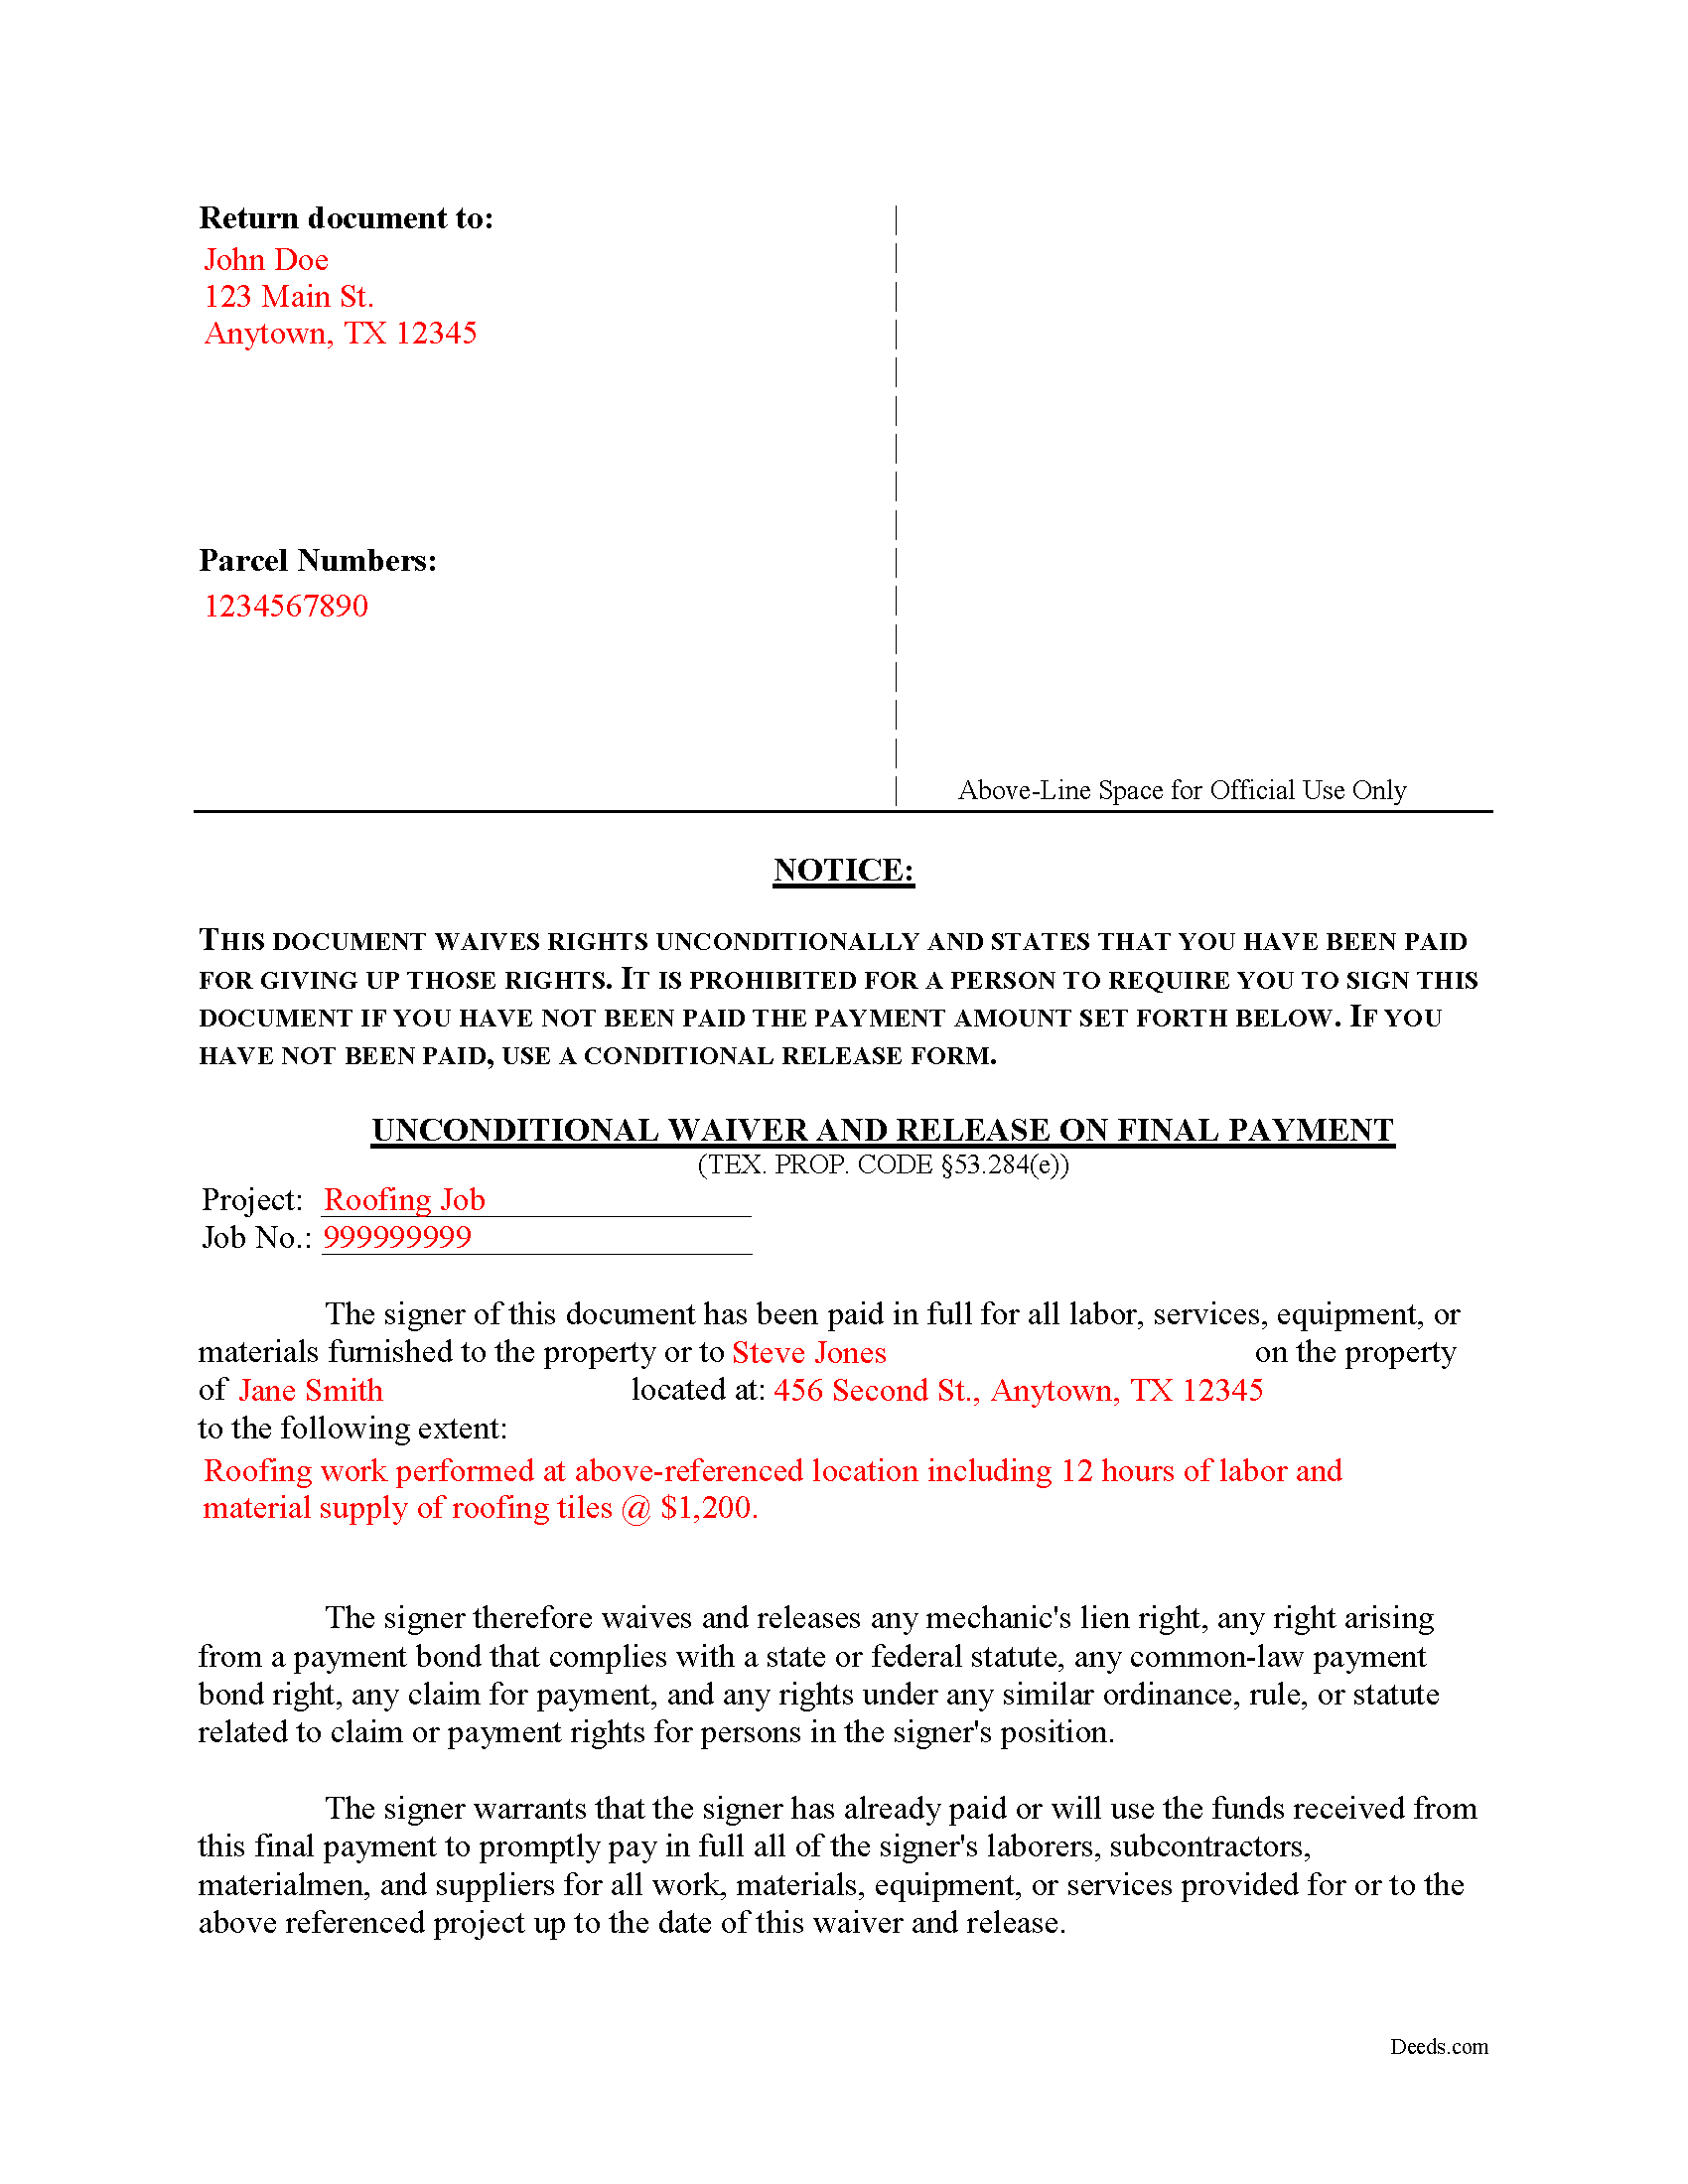 Completed Example of the Unconditional Waiver on Final Payment Document